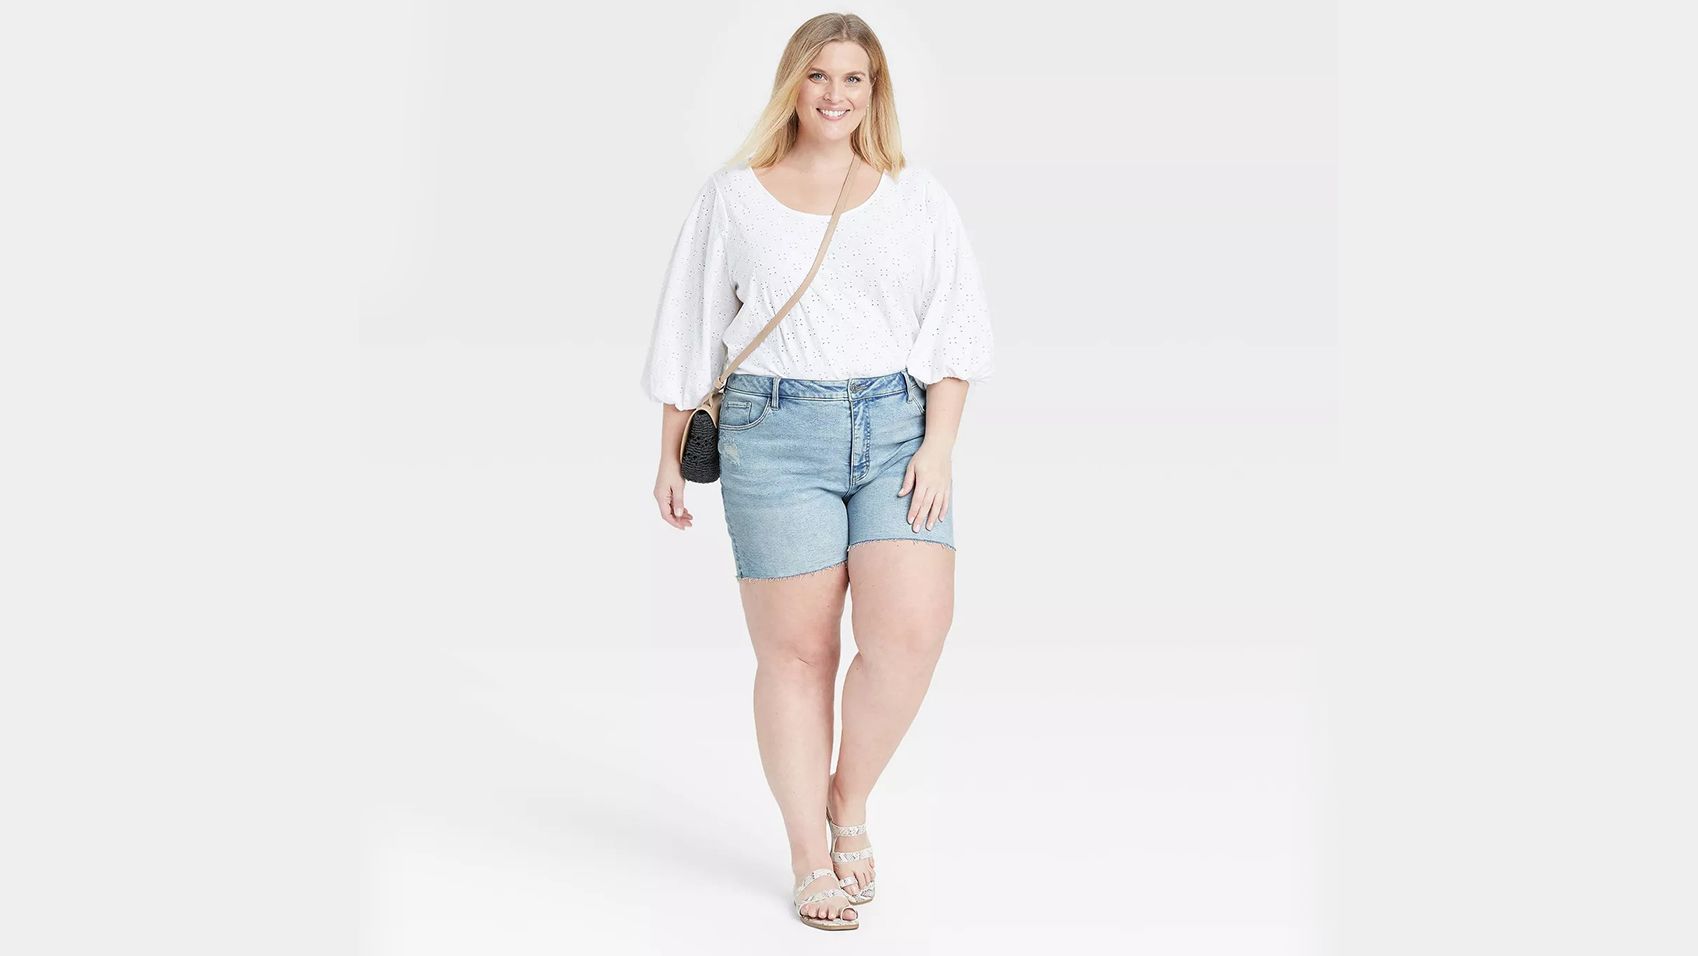 Best denim shorts for every body type